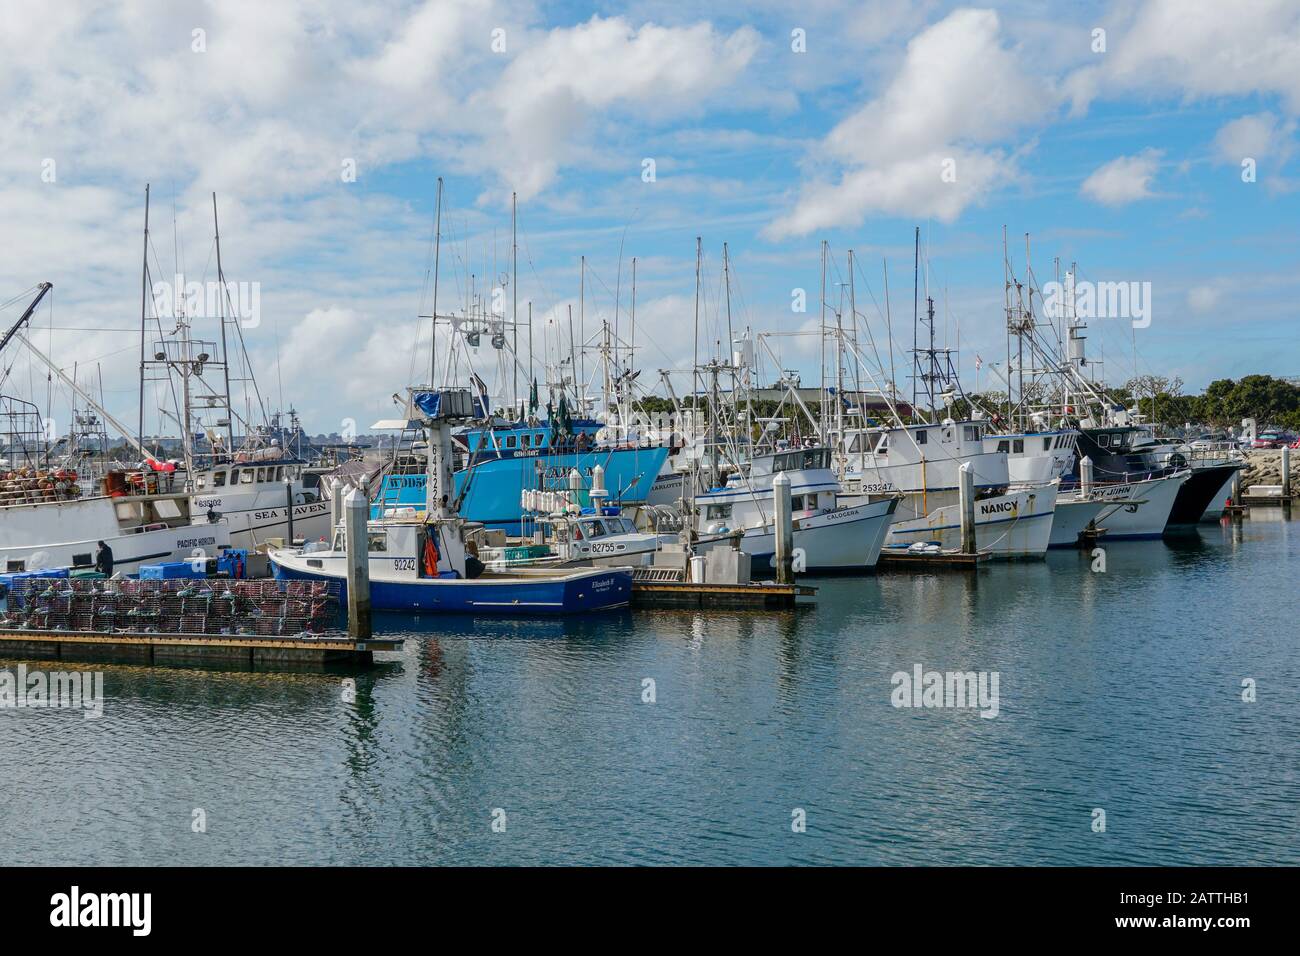 Commercial fishing boats docked in San Diego Harbor. Fish Harbor Pier Located in the downtown area of San Diego adjacent to seaport village. California, USA. January 19, 2020 Stock Photo